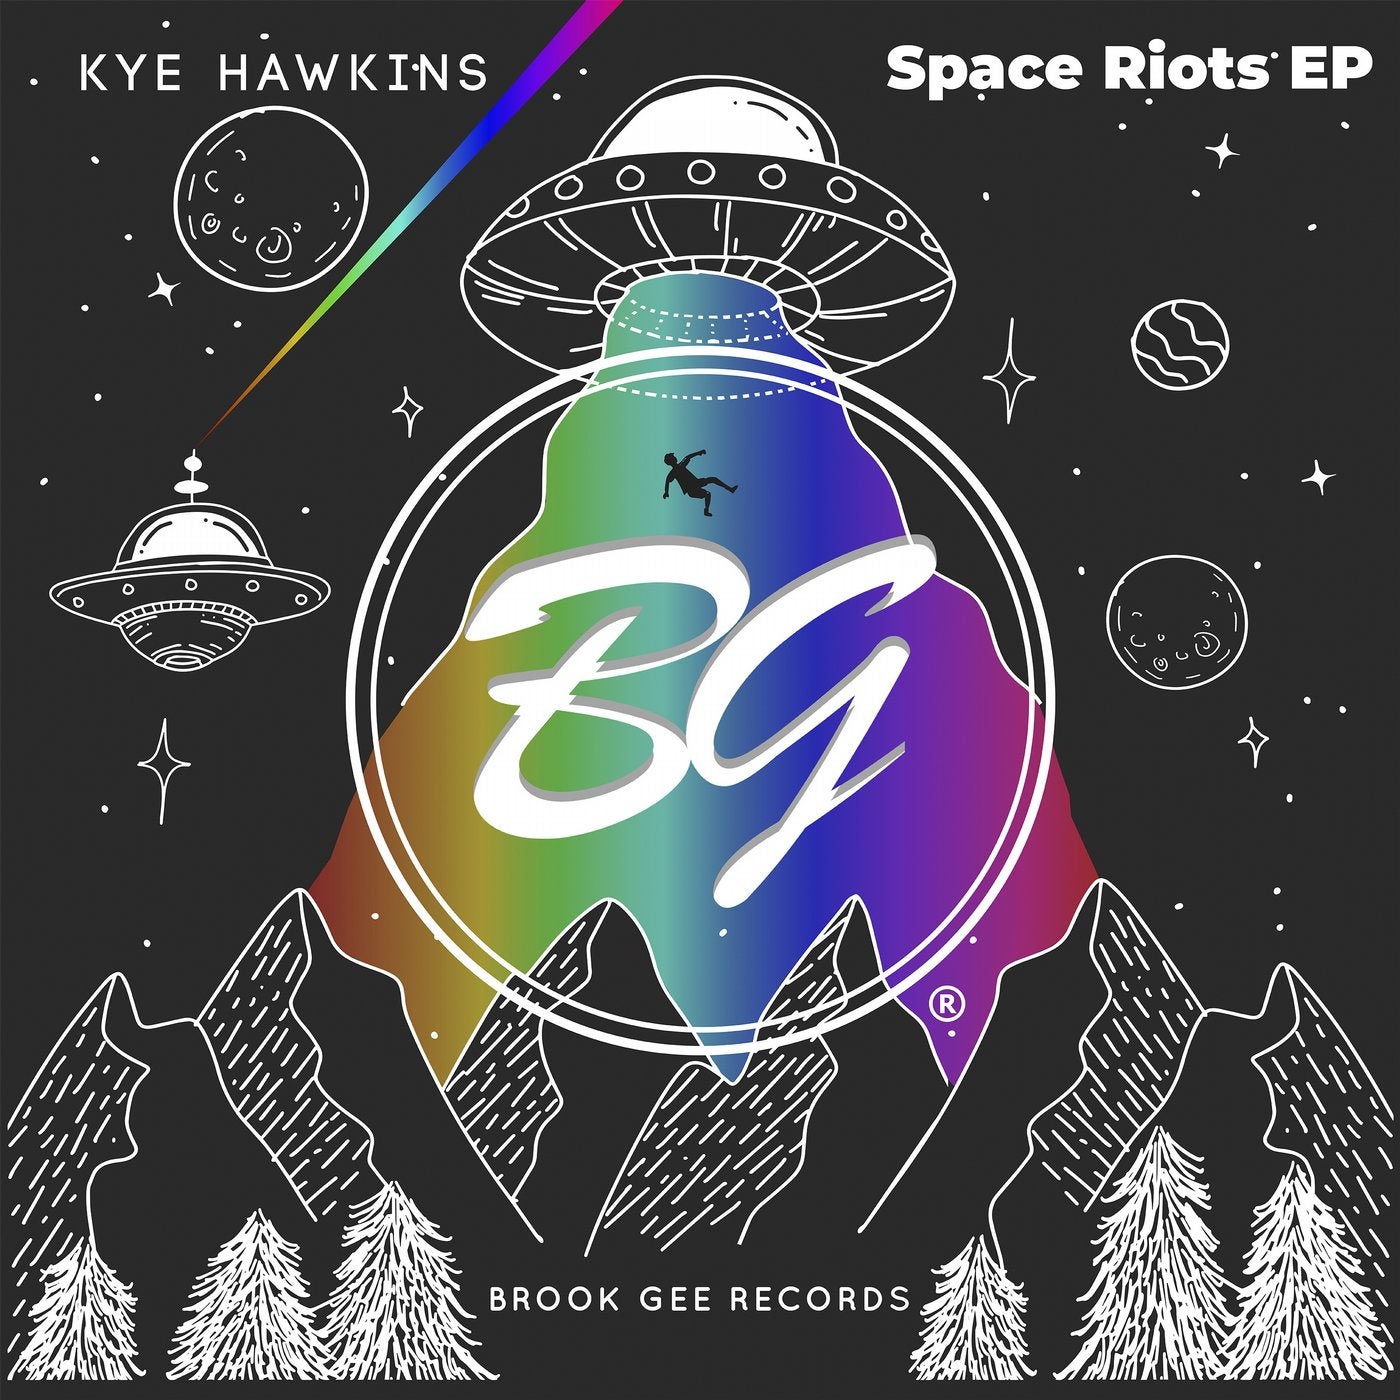 Space Riots EP